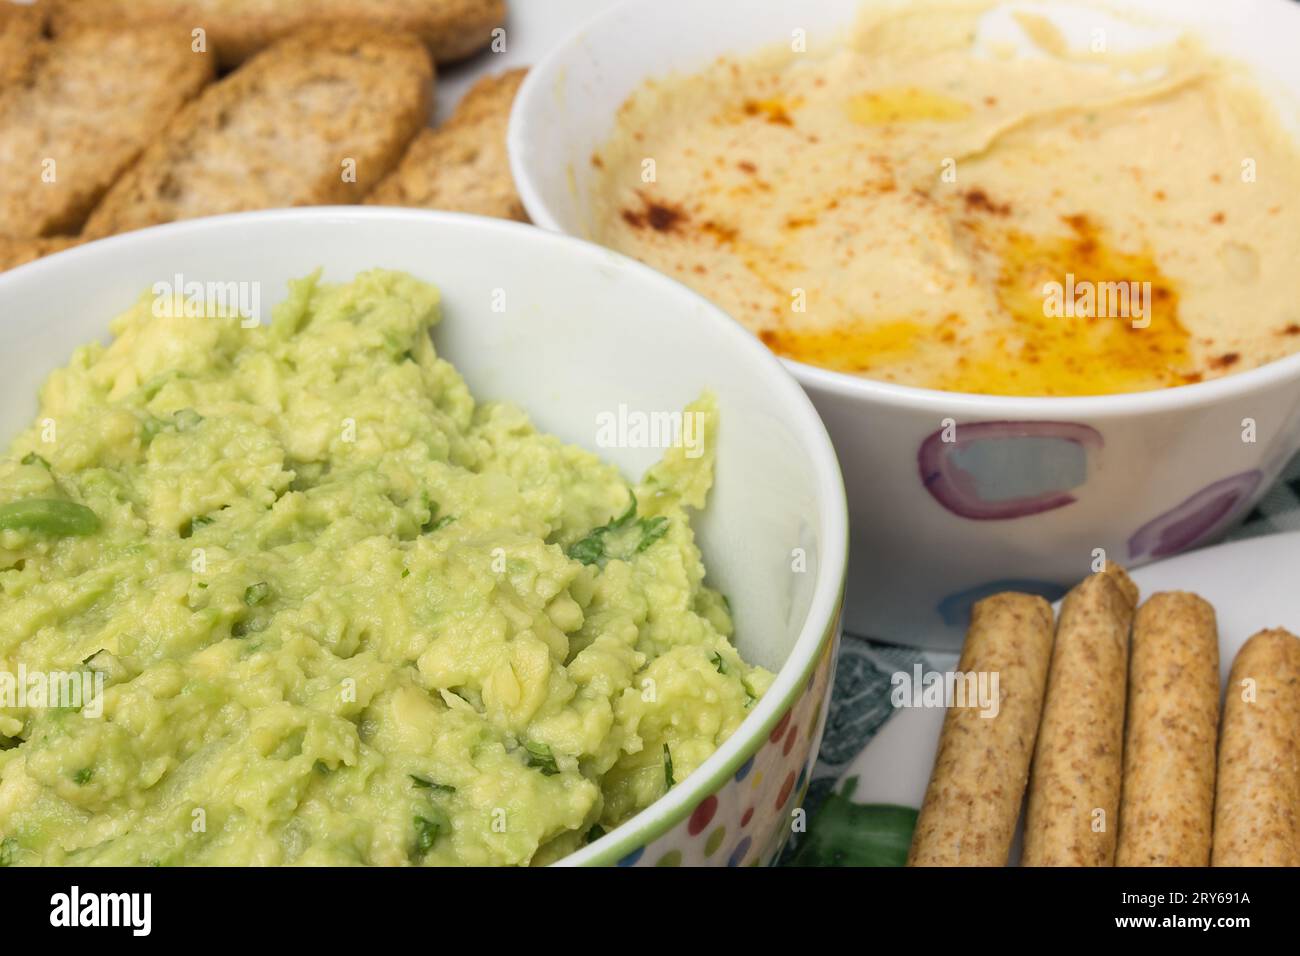 A close-up shot of a bowl of guacamole dip, made with fresh avocado, onion, and cilantro. The background is blurred, but you can see a bowl of hummus, Stock Photo